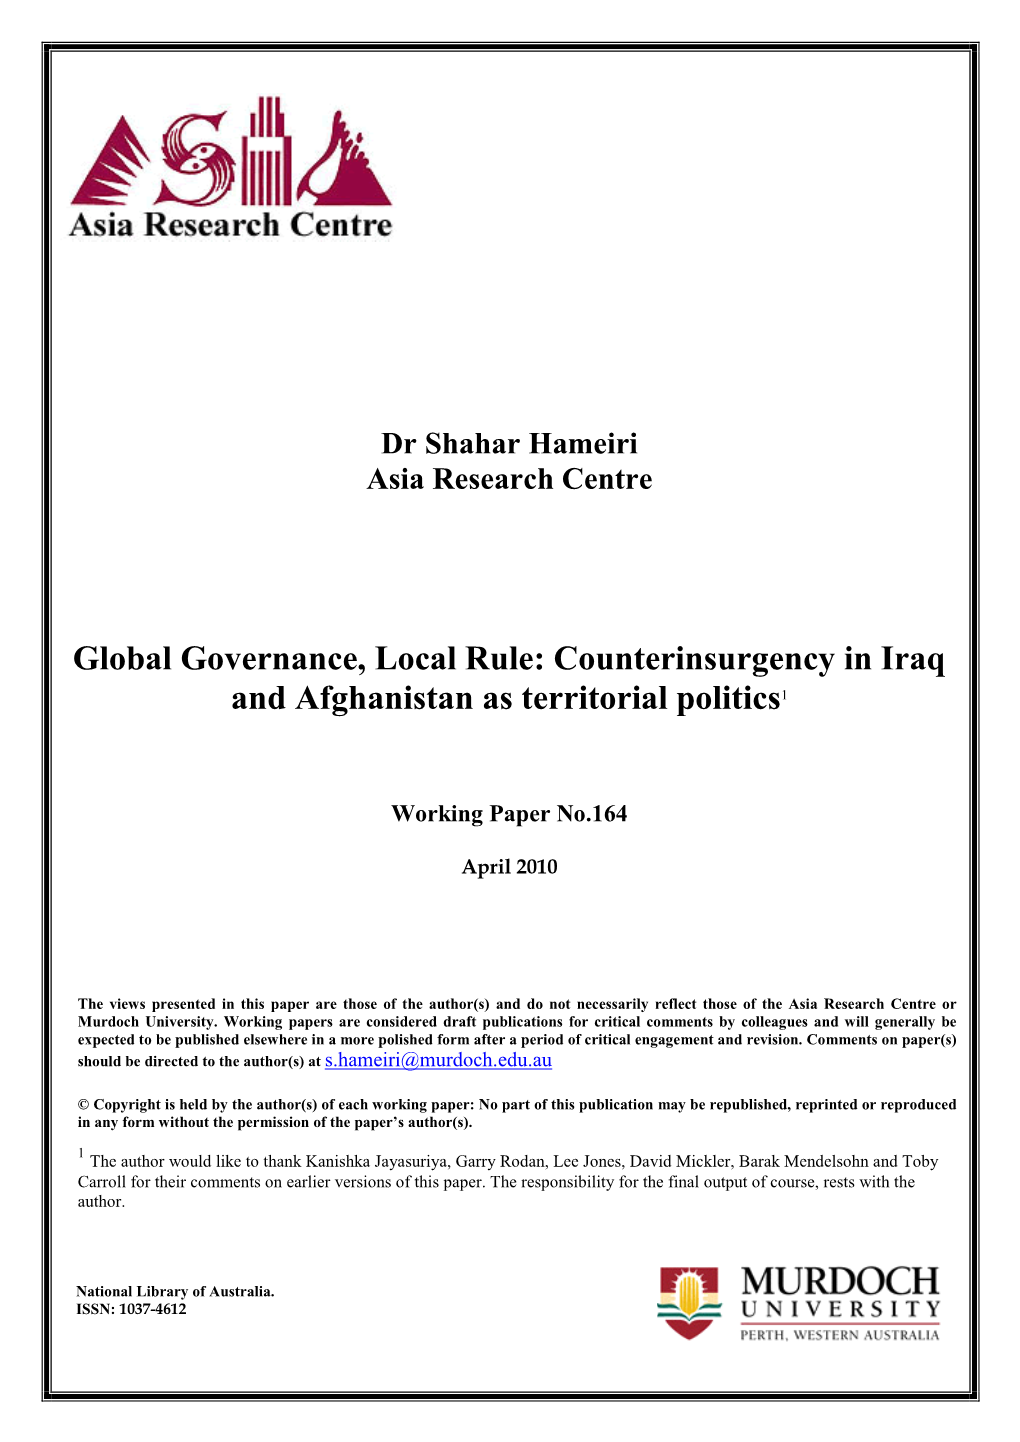 Global Governance, Local Rule: Counterinsurgency in Iraq and Afghanistan As Territorial Politics1